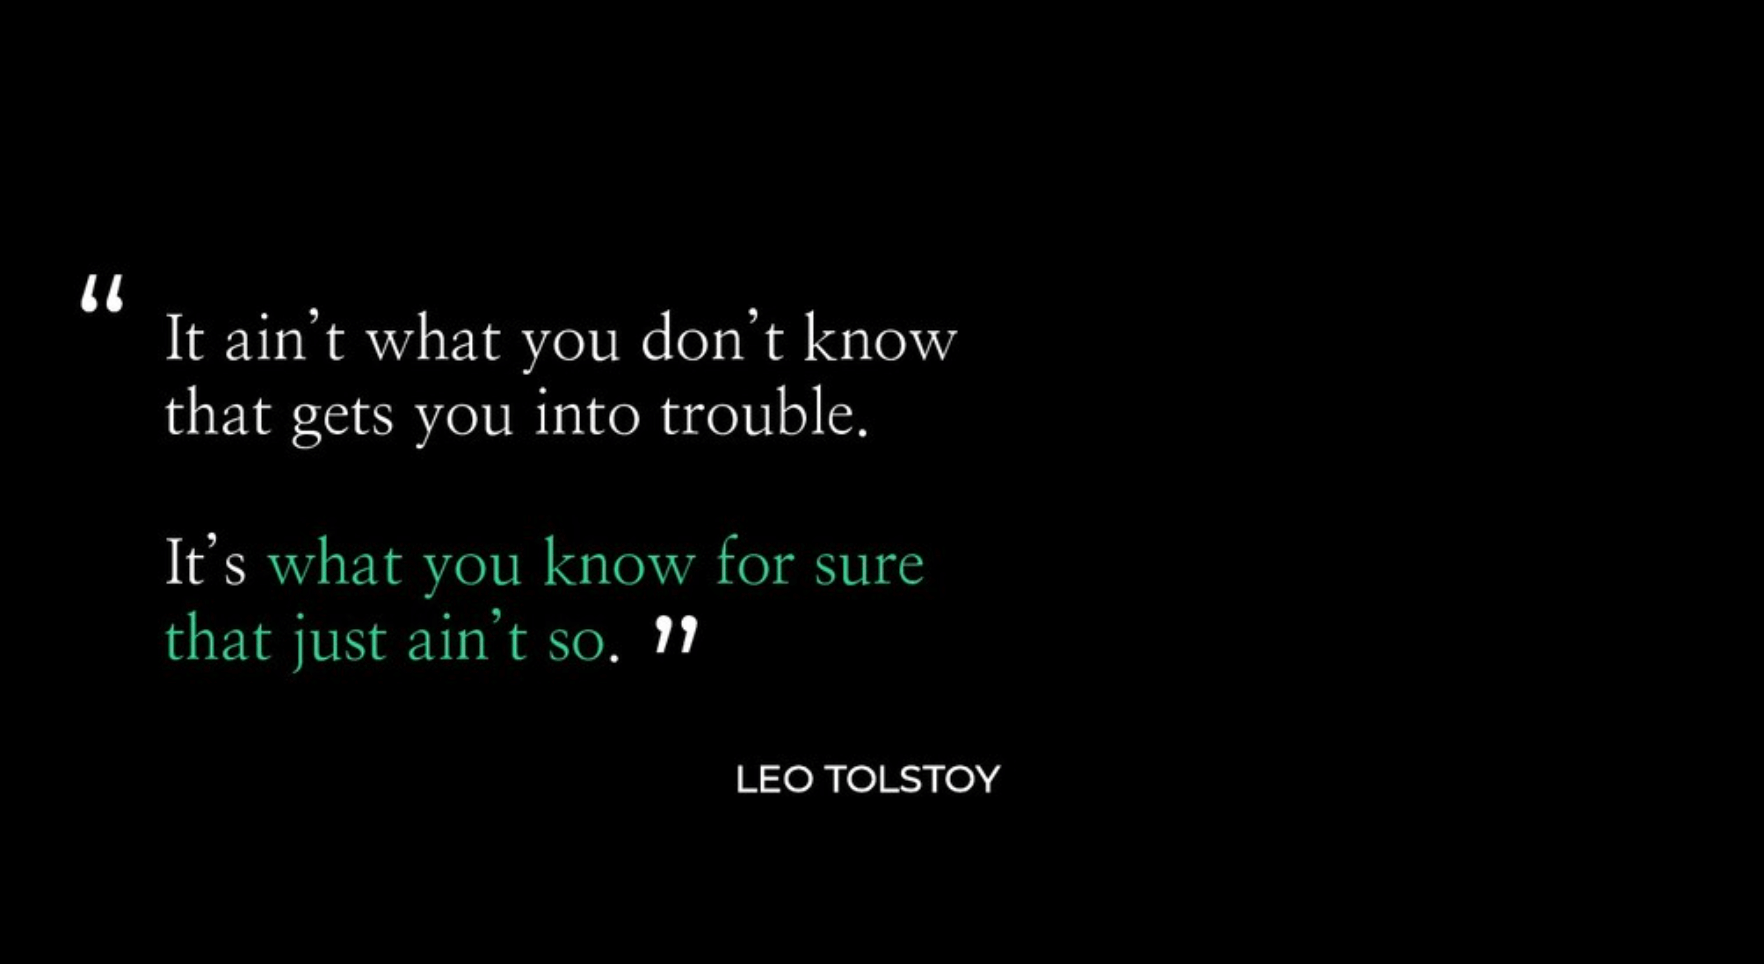 Quote from Lev Tolstoy.